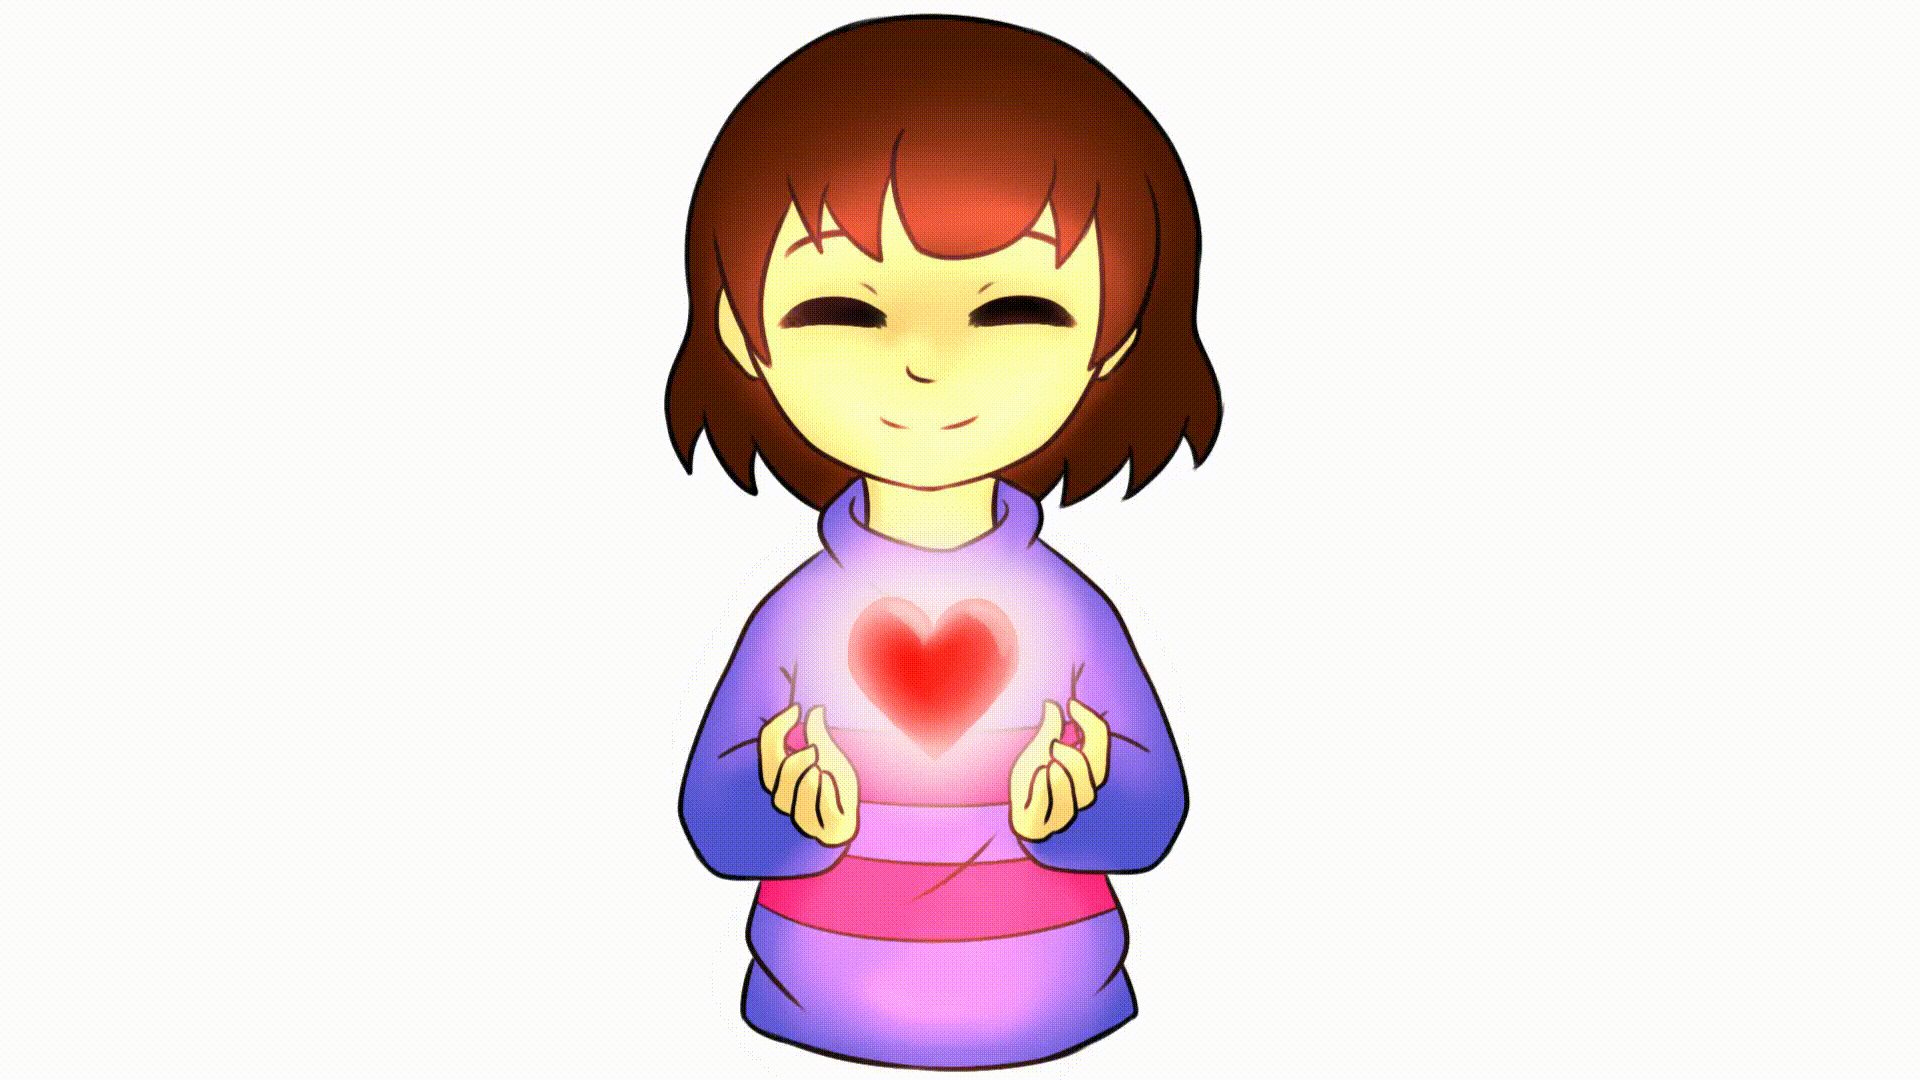 Frisk filled with Determination [GIF]